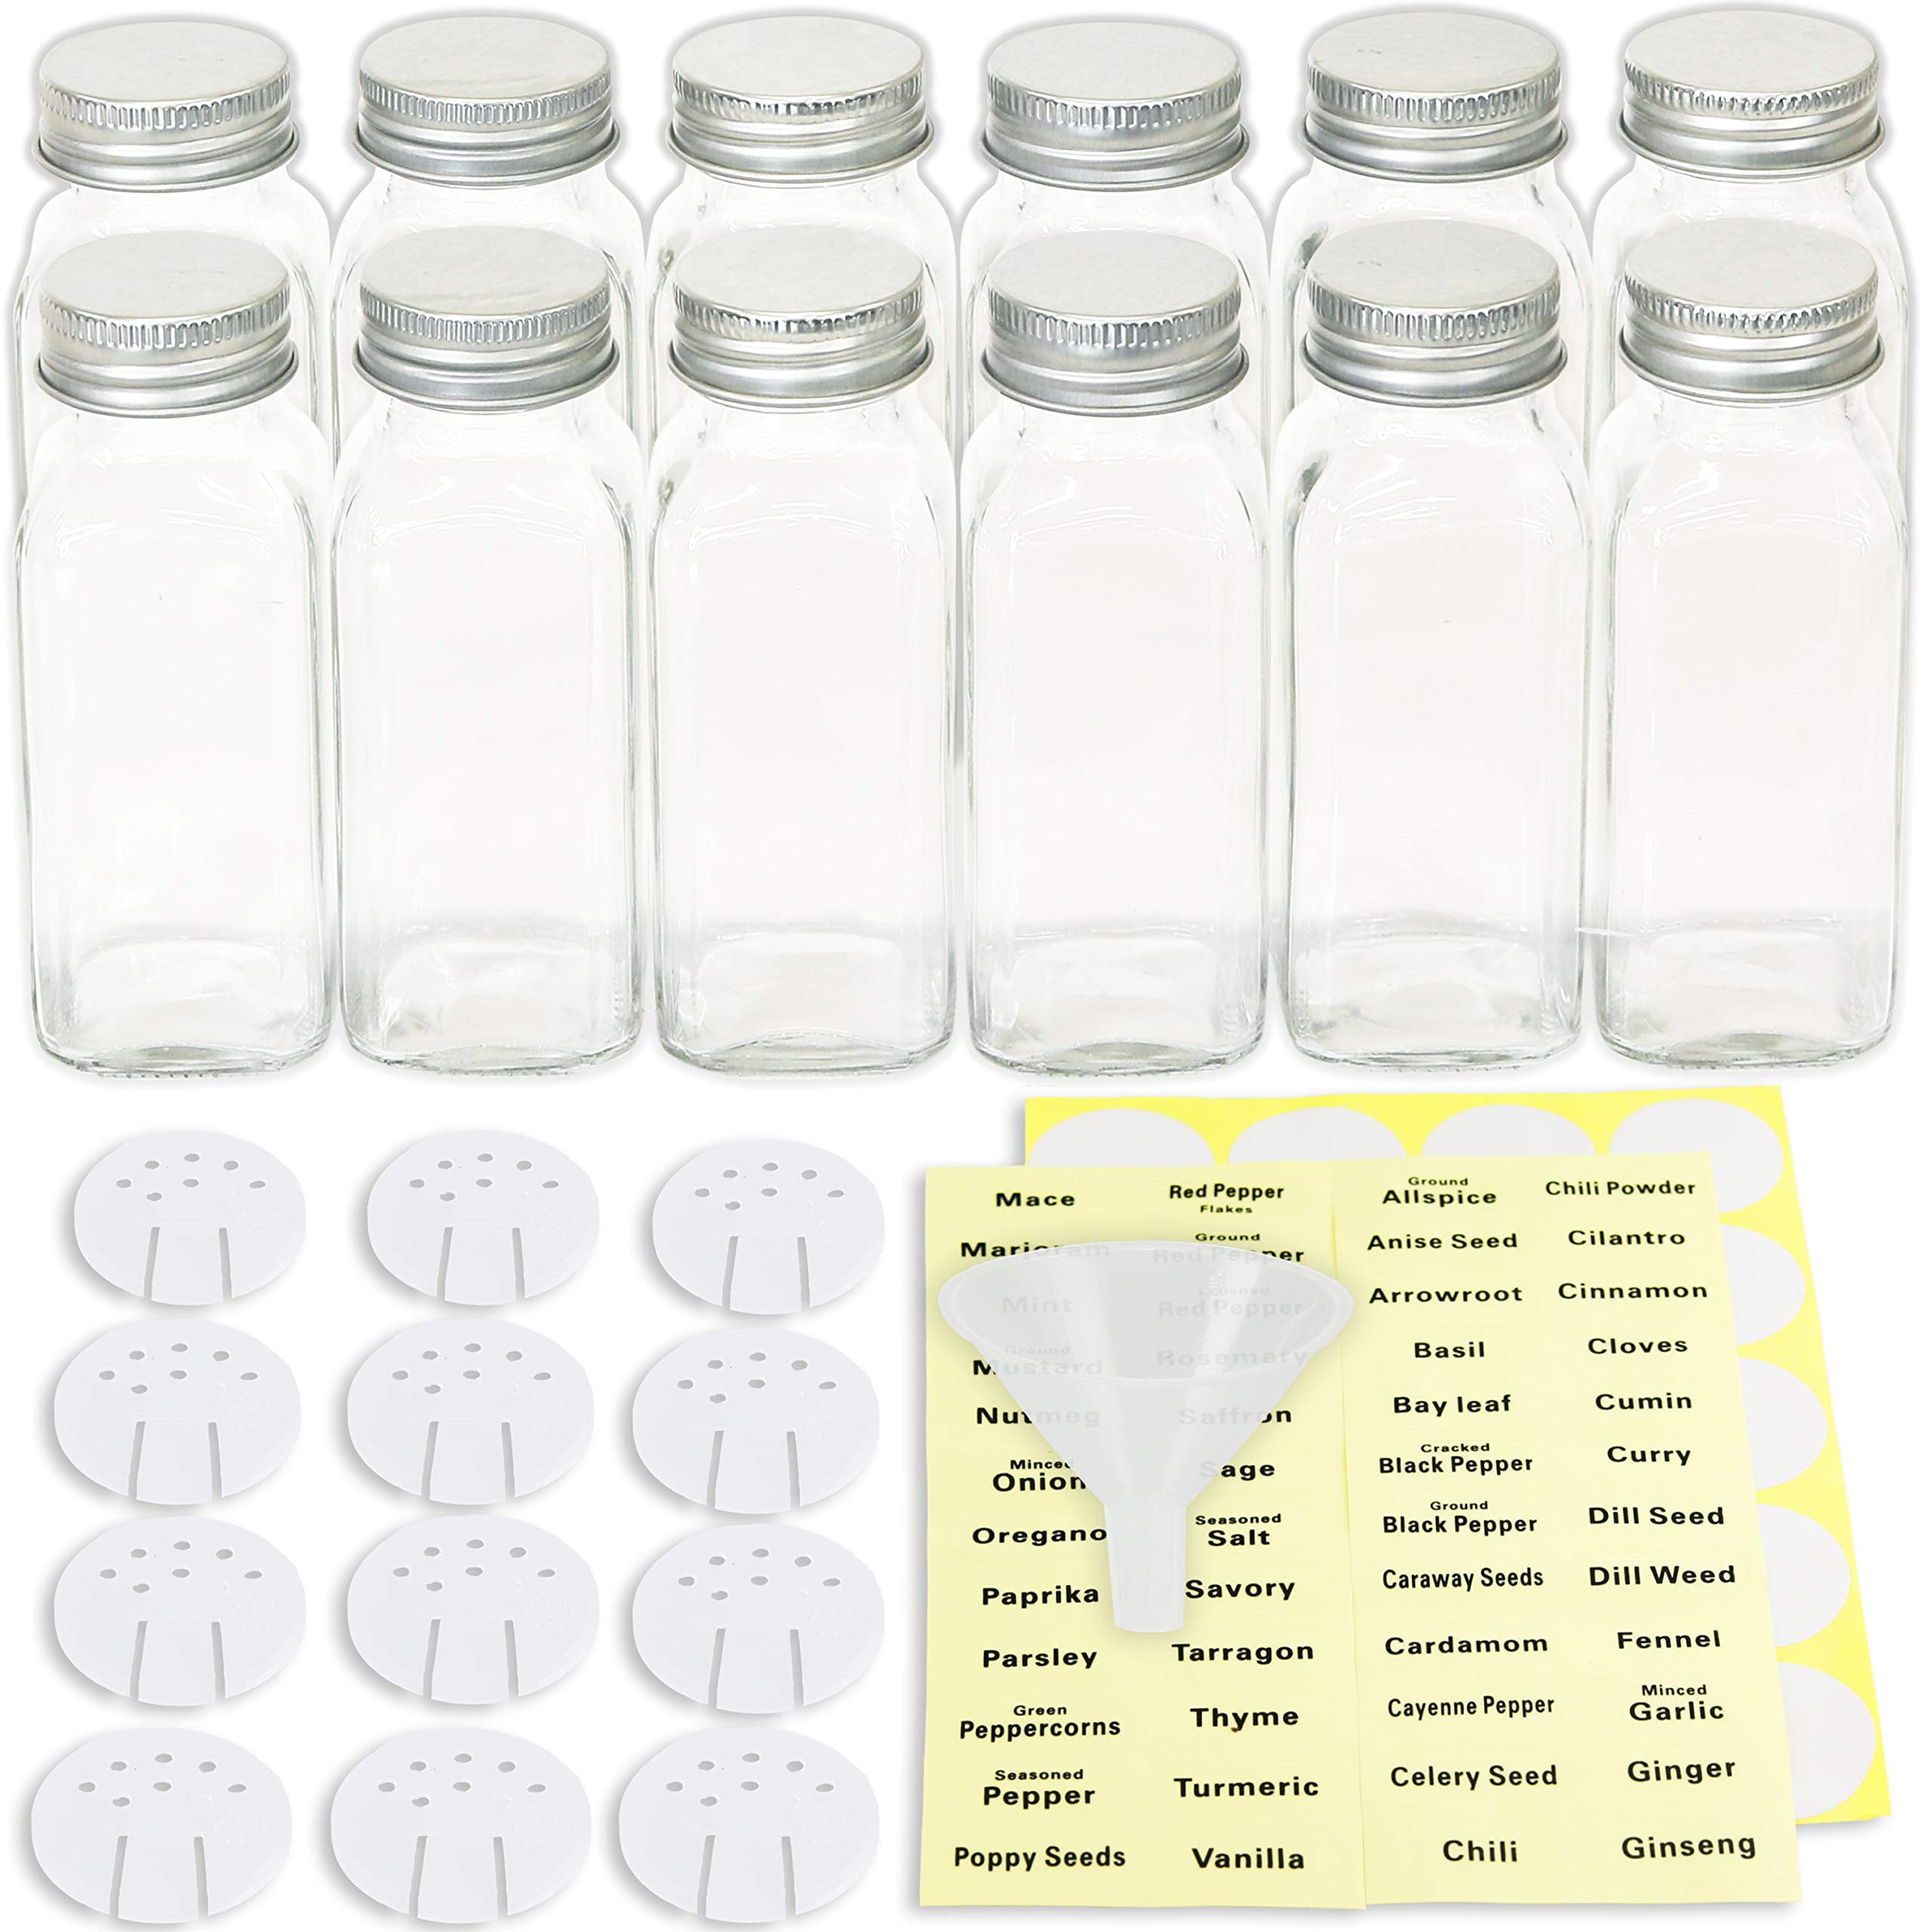 12 Pack of 6 Oz. Empty Clear Plastic Spice Bottles with White Sprinkle Top  Lids For Storing and Dispensing Salt, Sweeteners and Spices - Food-Grade